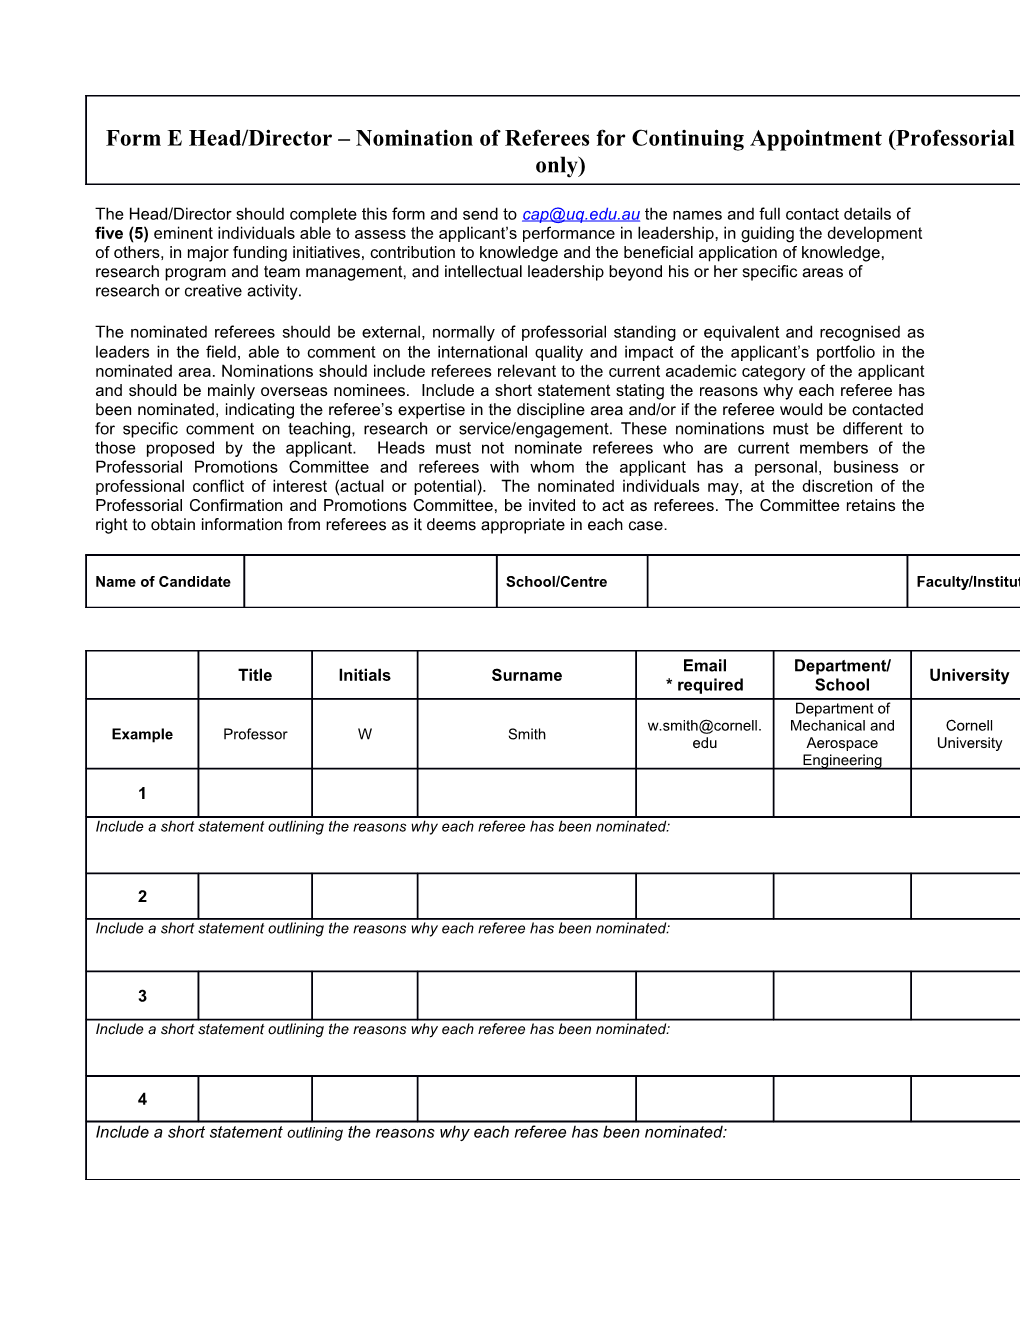 The Head/Director Should Complete This Form and Send to the Names and Full Contact Details